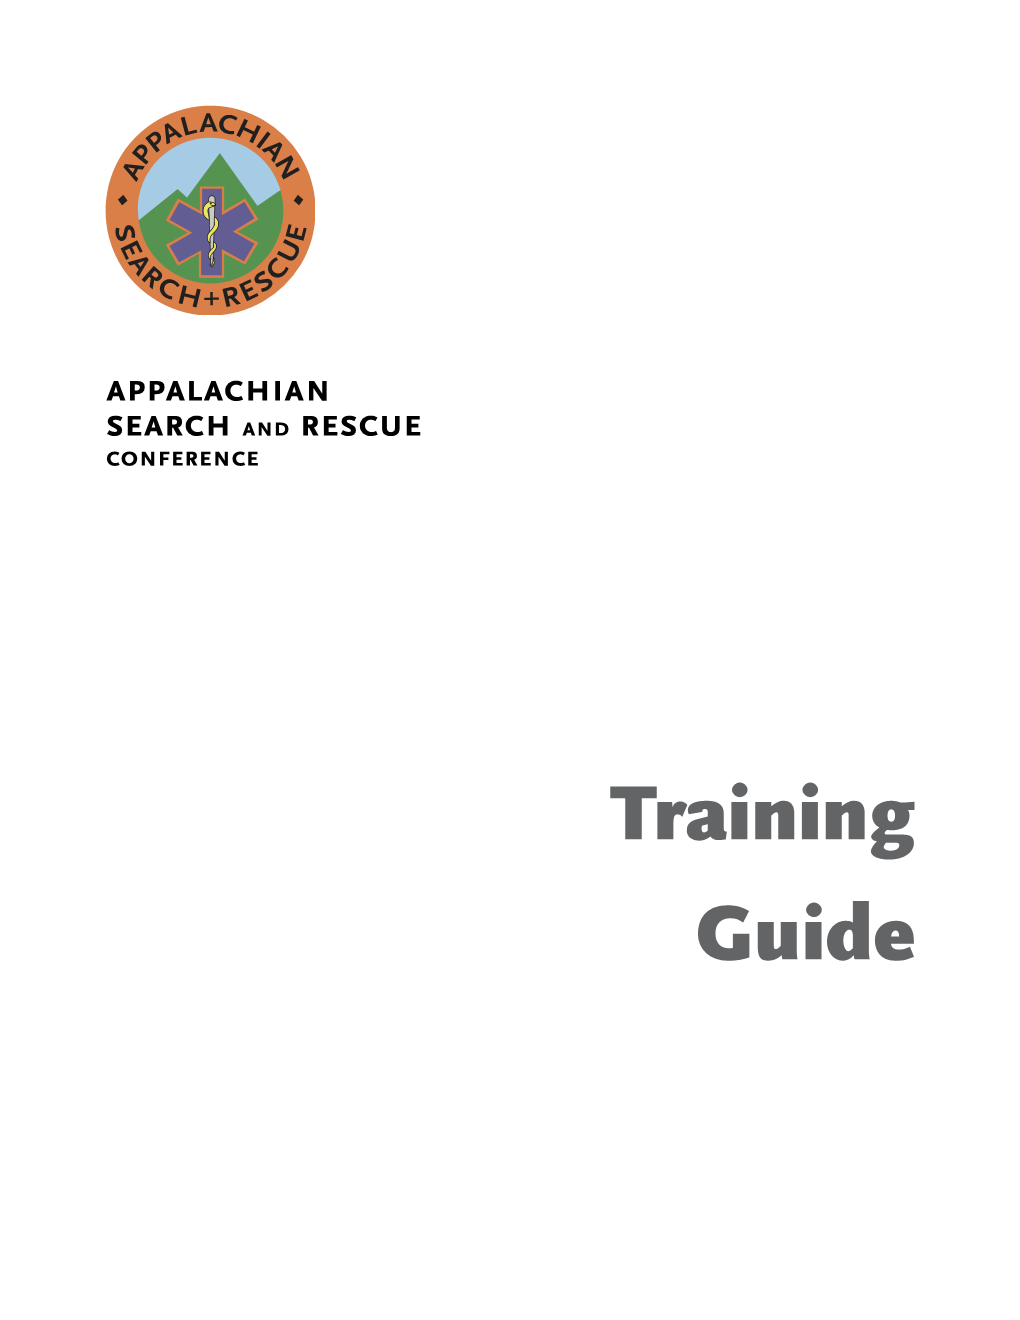 ASRC Training Guide Version 1.0 Established by ASRC Board of Directors 5 October 2019 Approved by ASRC Publications Committee 5 October 2019